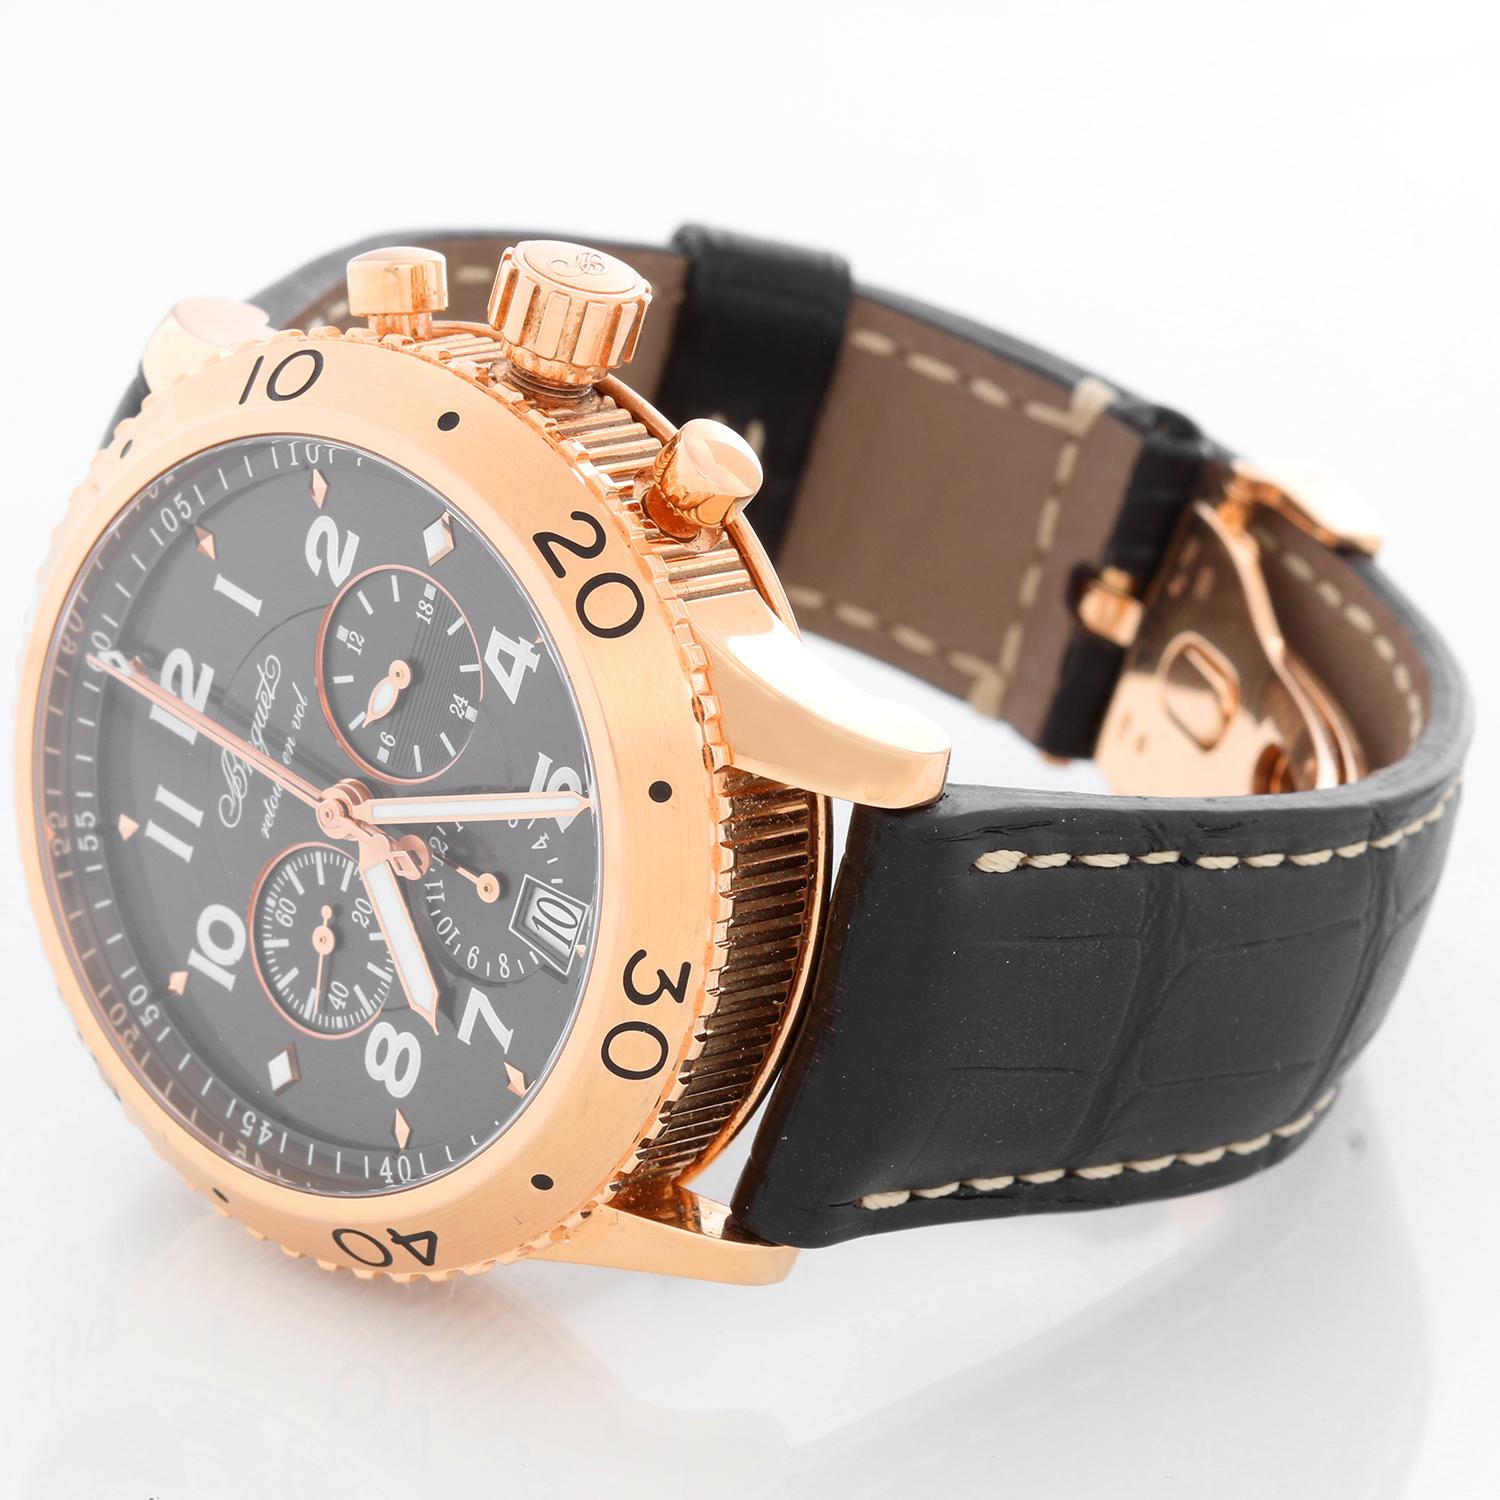 Breguet Transatlantique Type XXI Flyback Men's  Rose Gold Chronograph Watch 3810BR - Automatic winding. Rose gold case (42mm diameter). Brown dial with white Arabic numerals; flyback chronograph; hour, minute and seconds recorders; date. Breguet